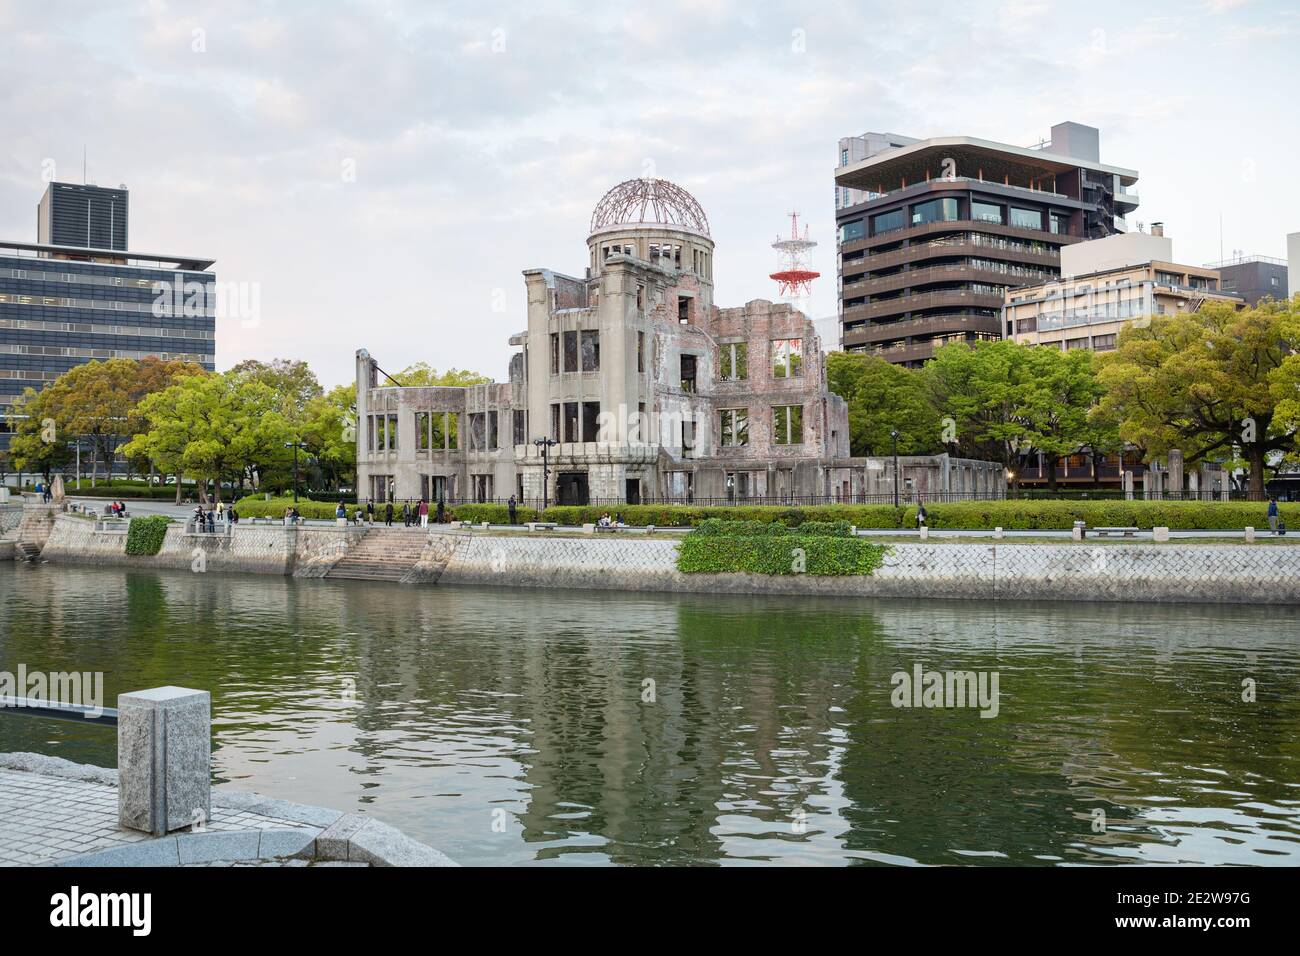 Hiroshima Peace Memorial, viewed across and reflected in the river, with the city behind and people walking past, Hiroshima, Japan Stock Photo